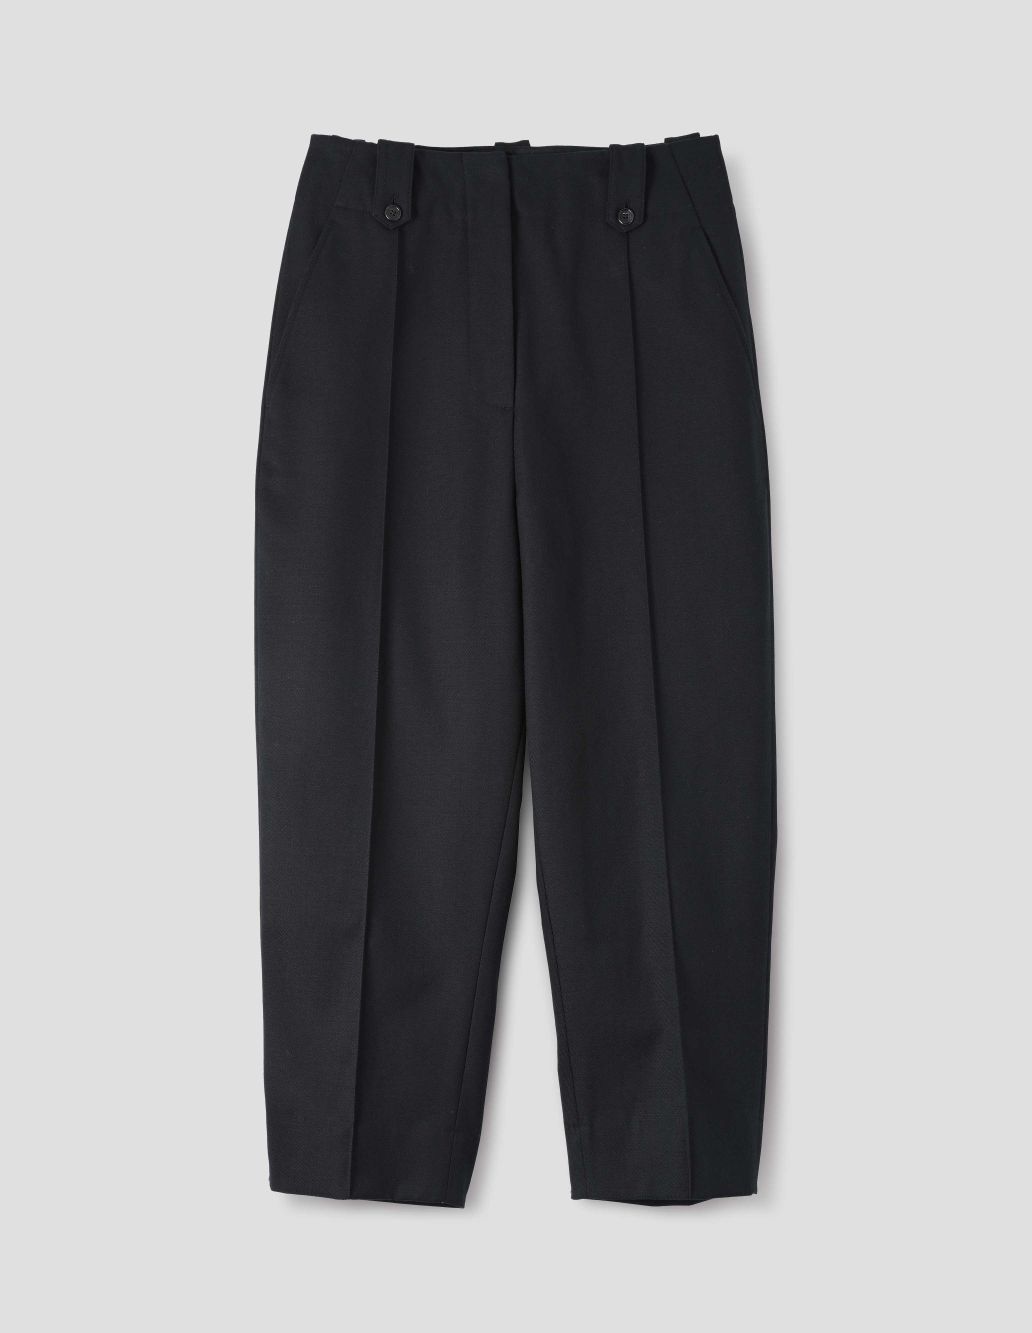 MARGARET HOWELL - Black whipcord wool cotton cropped trouser | Margaret ...